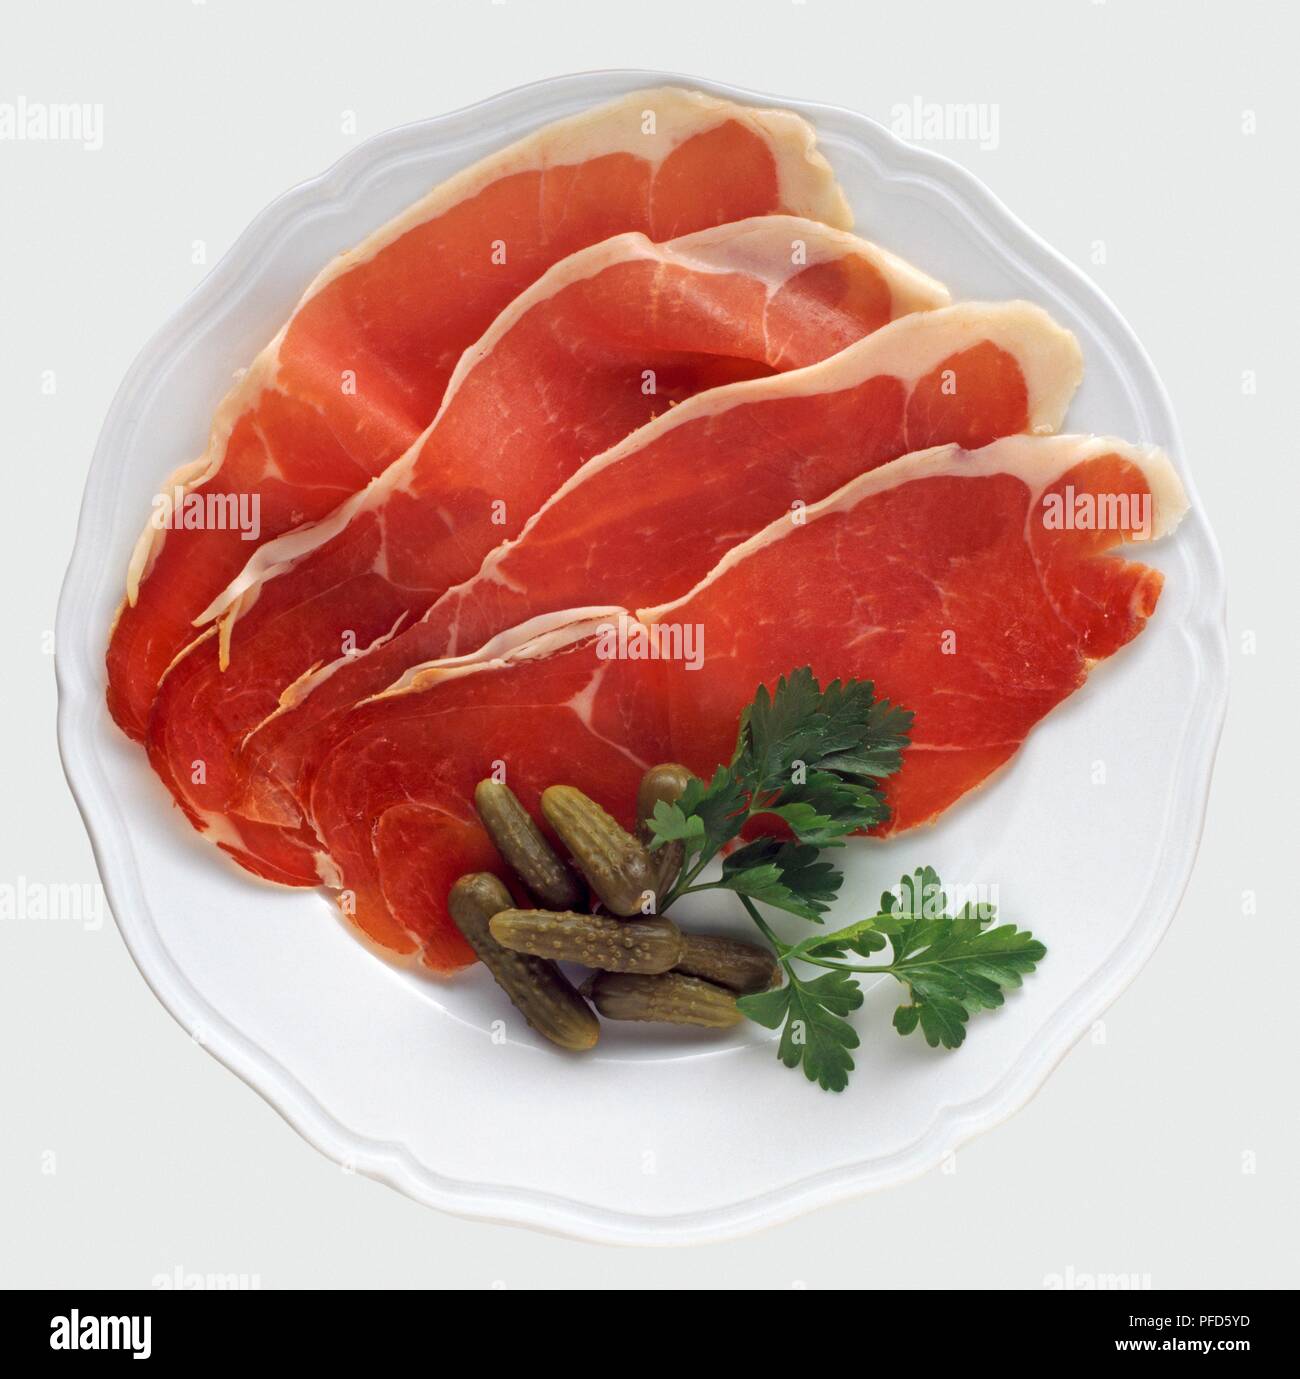 Plate of Ardennes ham with cornichons and sprig of parsley, view from above Stock Photo